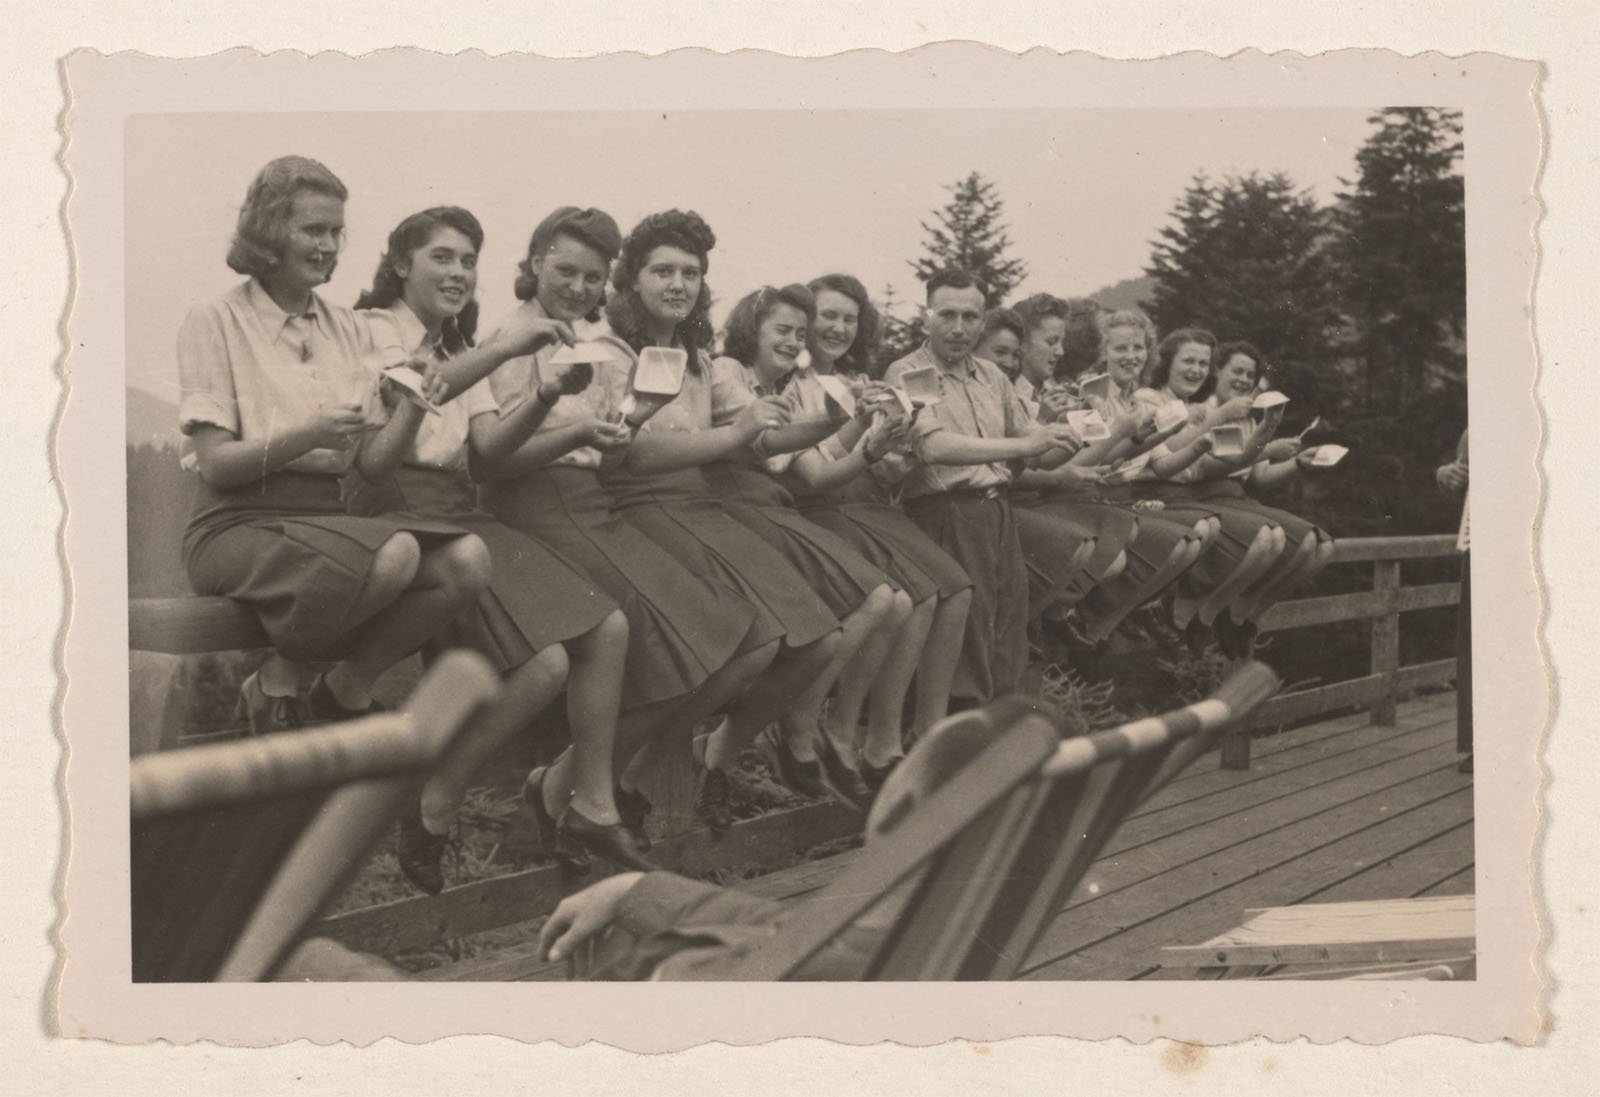 A vintage black-and-white photo shows a group of women and one man sitting in a row on a wooden fence, each holding a small cup and saucer. They are dressed in similar attire, likely from the mid-20th century. Trees and a wooden deck are in the background.